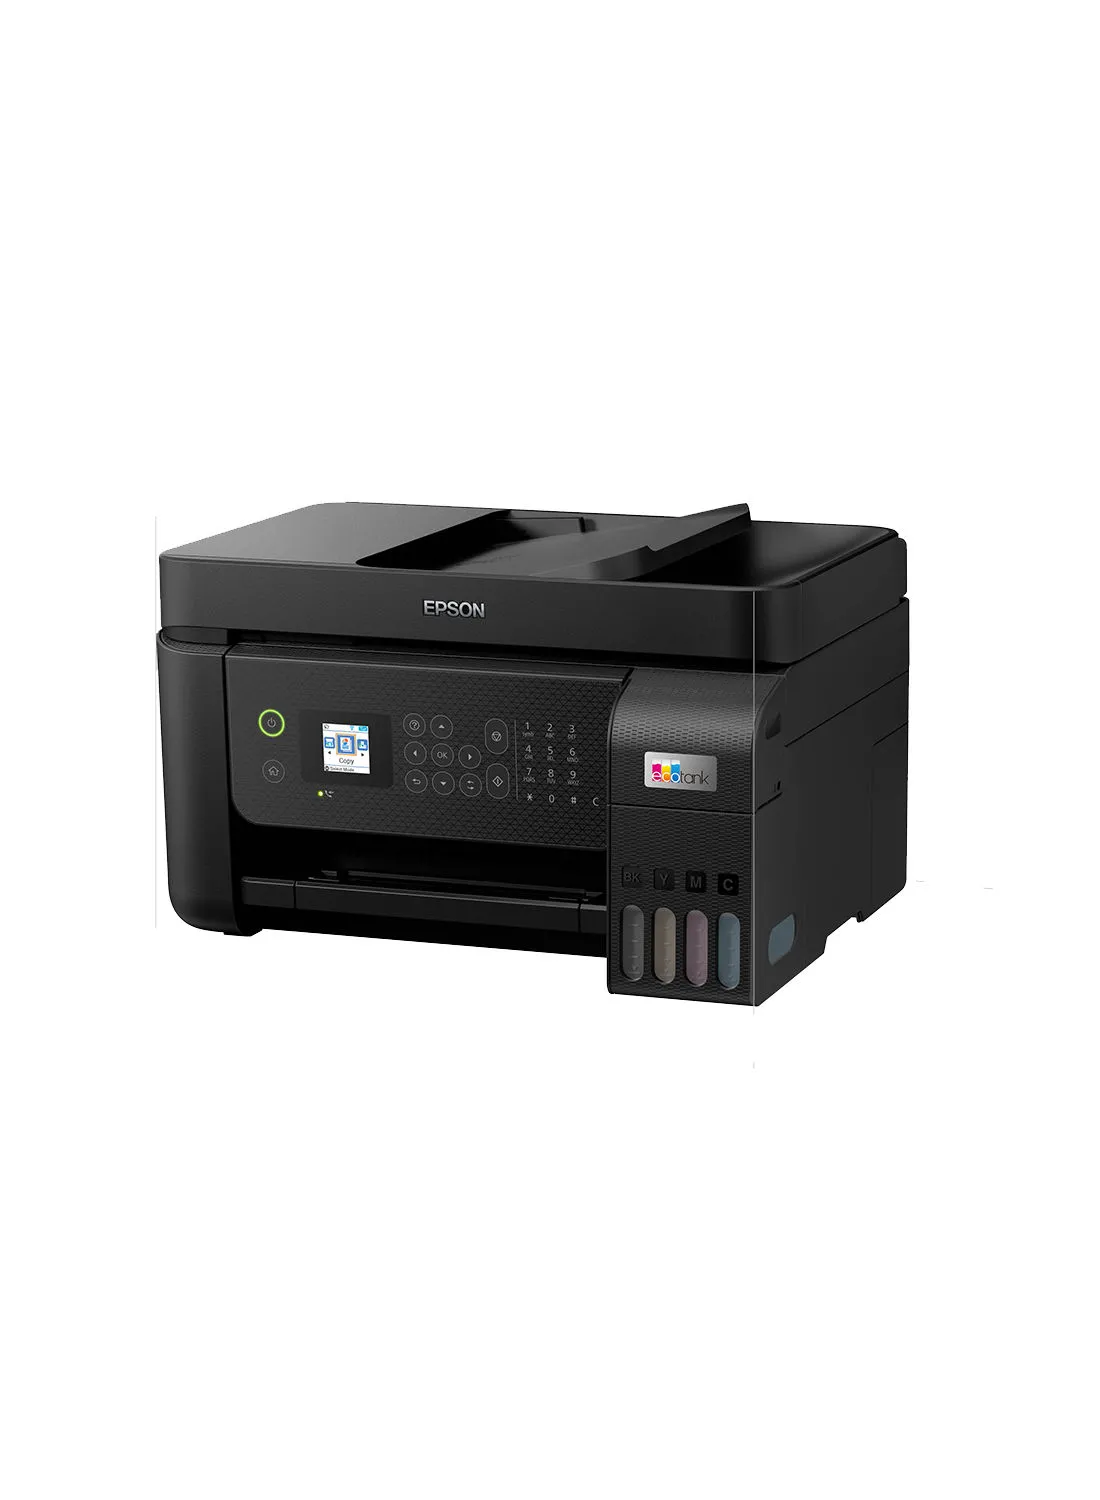 EPSON Ecotank L5290 Office Ink Tank Printer A4 Colour 4-In-1 Printer With ADF, Wi-Fi And Smart Panel Connectivity And Lcd Screen Black